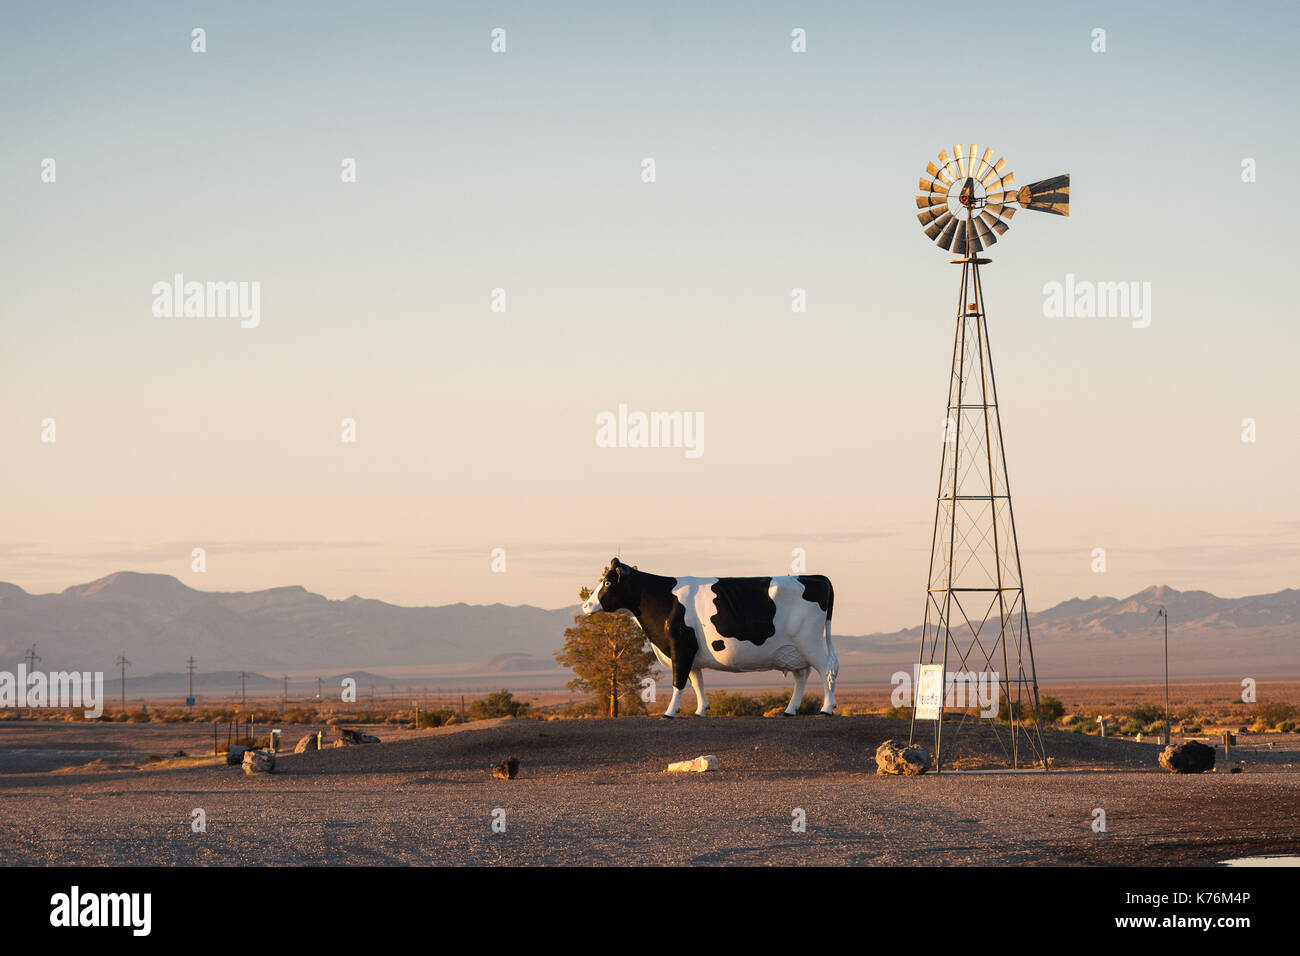 The Big Bovine Of The Desert at sunset in the Armagosa Valley, Nevada, near the California State Line and Death Valley Junction Stock Photo